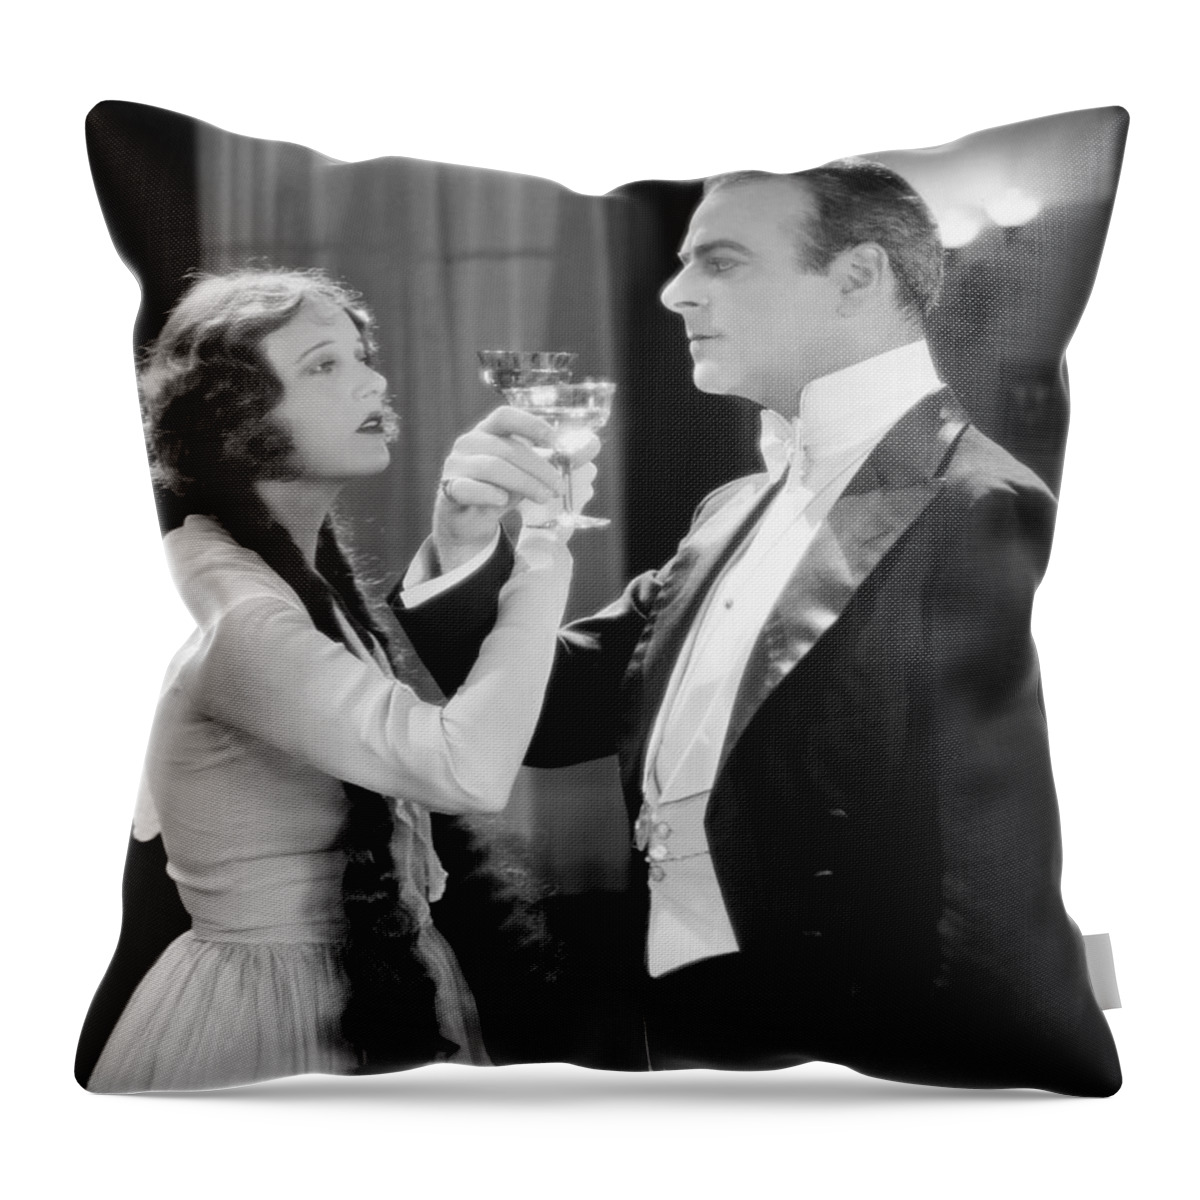 1920s Throw Pillow featuring the photograph Silent Film Still: Drinking #1 by Granger